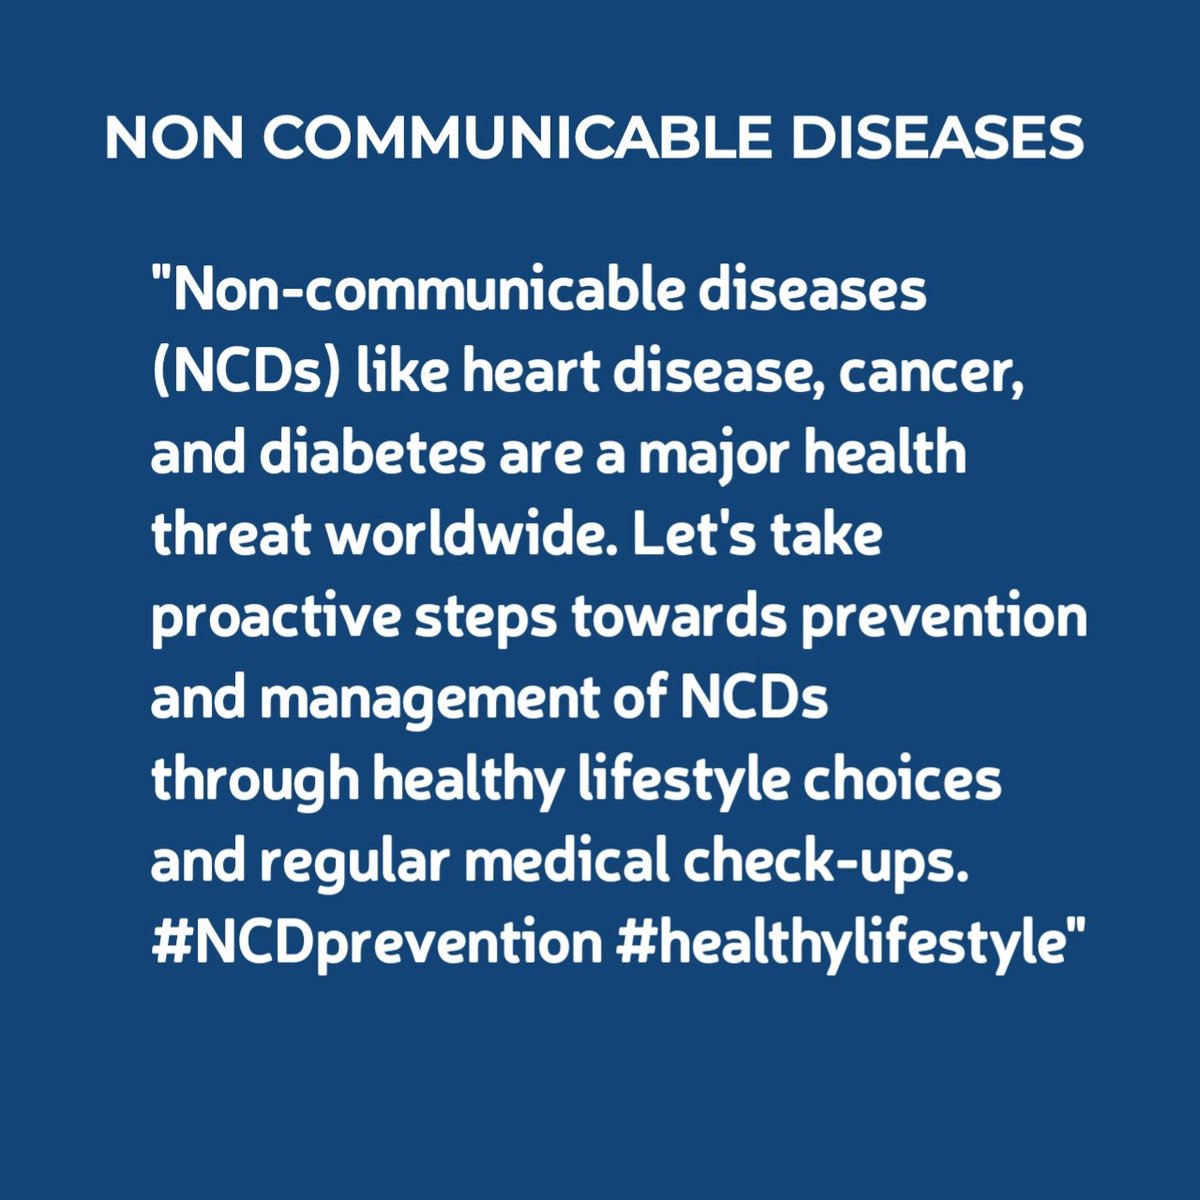 'Non-communicable diseases are major health threat worldwide. Let's take proactive steps towards prevention and management of NCDs through healthy lifestyle choices and regular medical check-ups. #NCDprevention #healthylifestyle
@udom_public_hdp @Katalam1Leonard @elimuyaafya